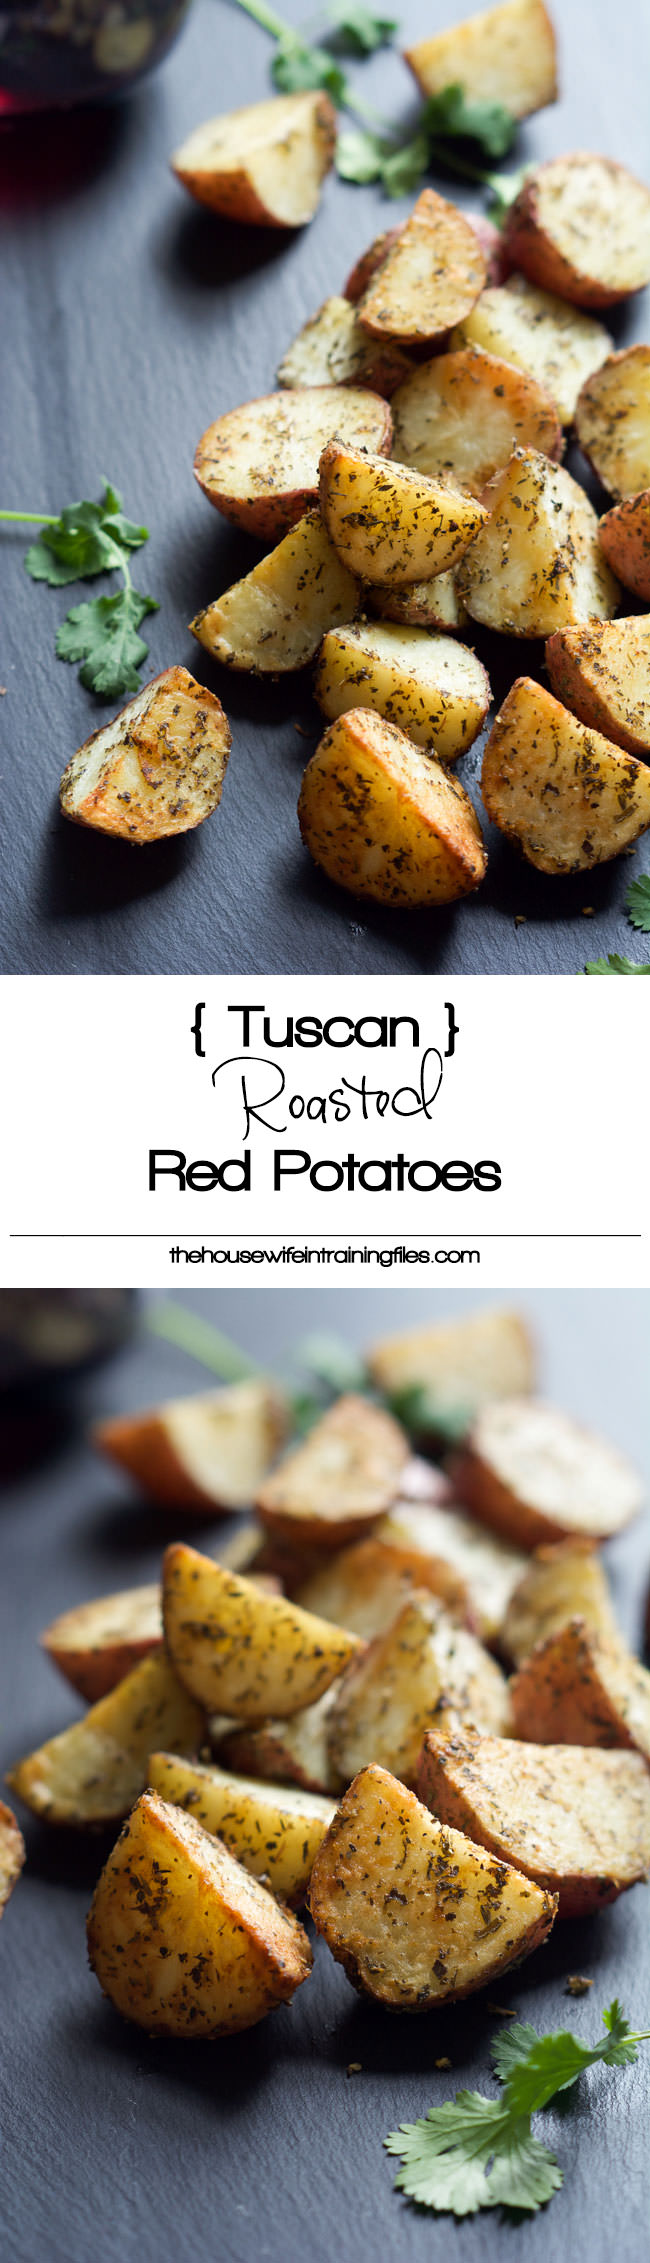 A simple, flavorful and healthy side dish! Tuscan Oven Roasted Red Potatoes are seasoned with herbs you already have in your pantry and will be on the table in under 30 minutes! 